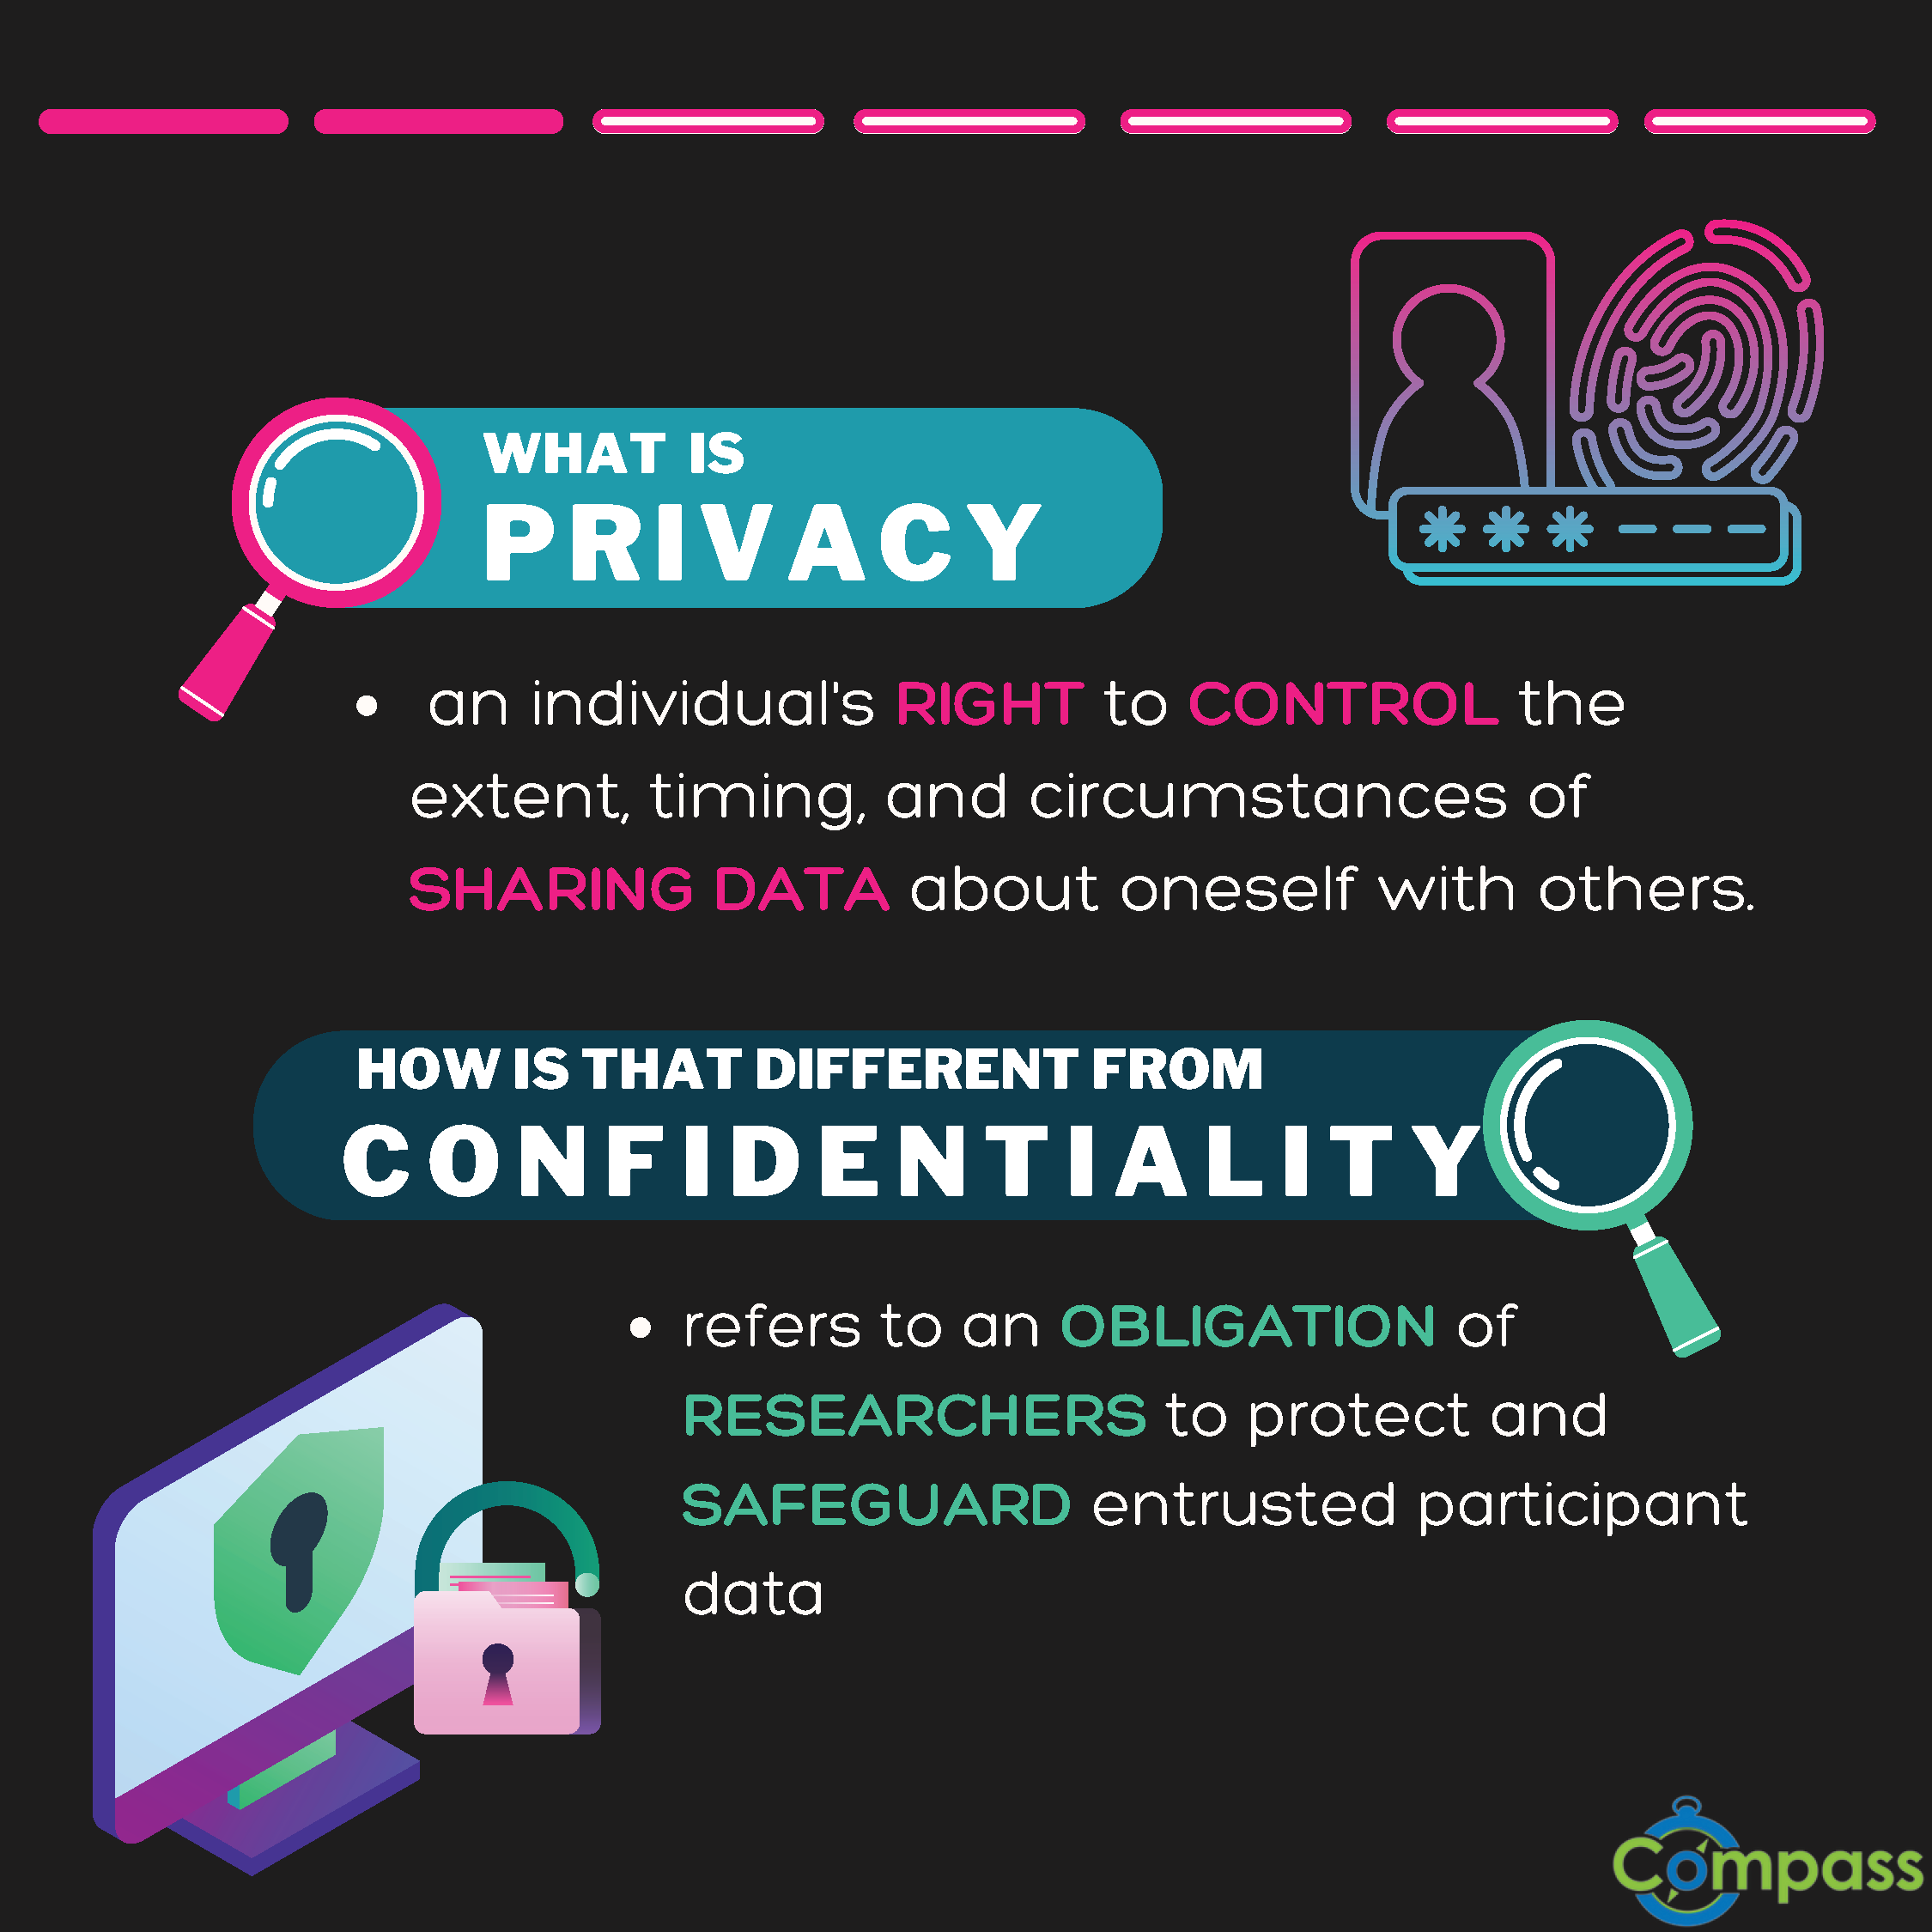 Figure 2 - what is privacy